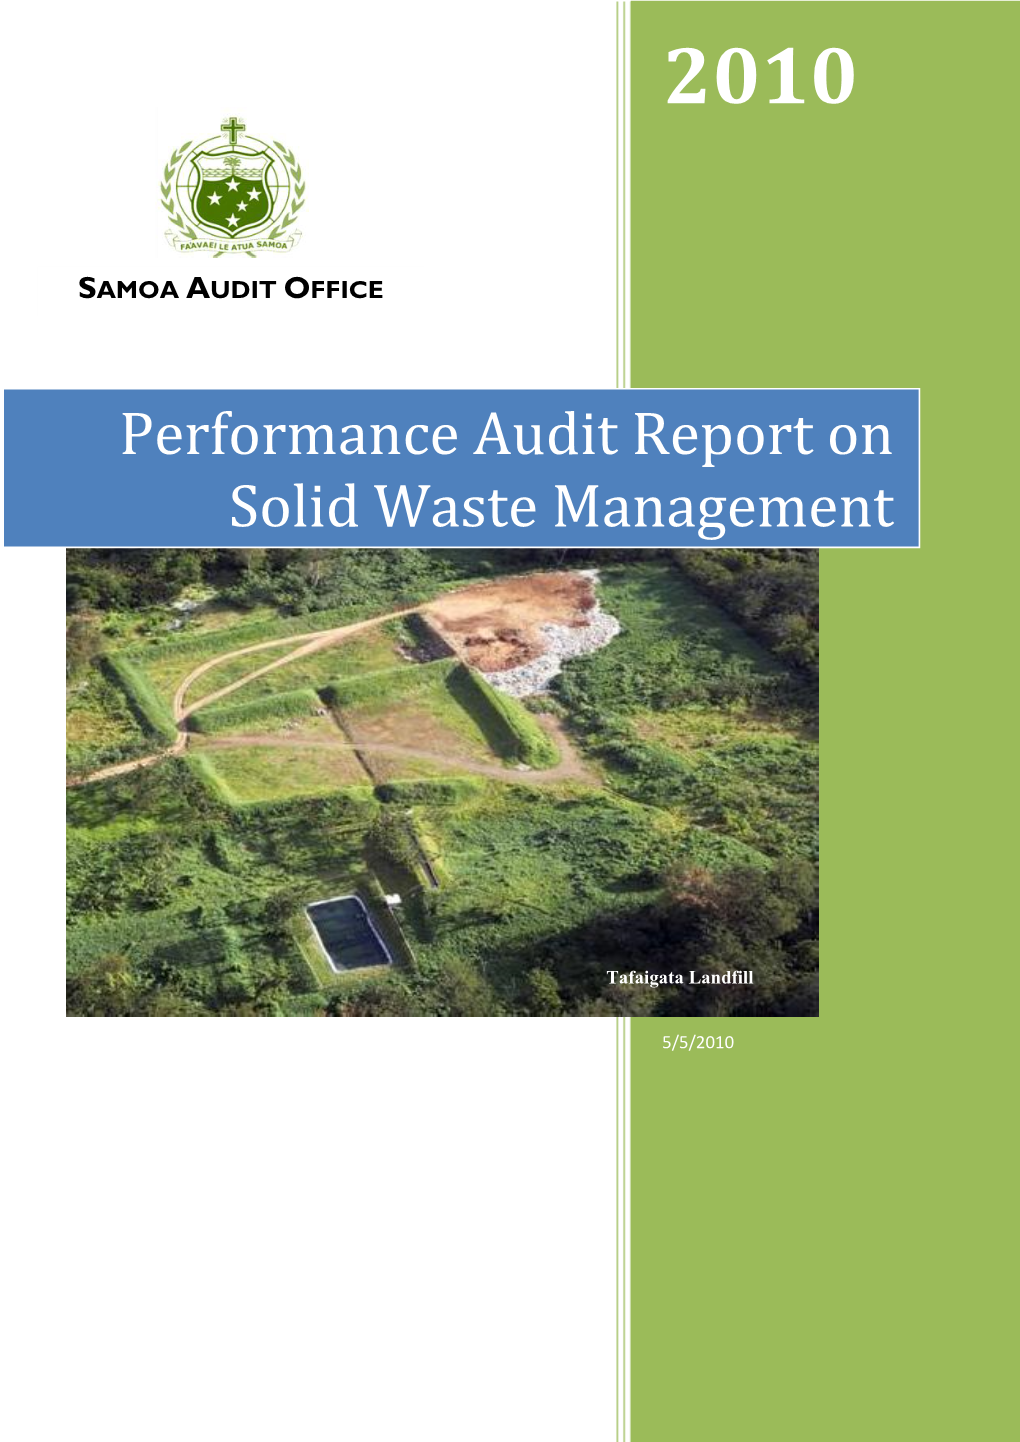 Performance Audit Report on Solid Waste Management